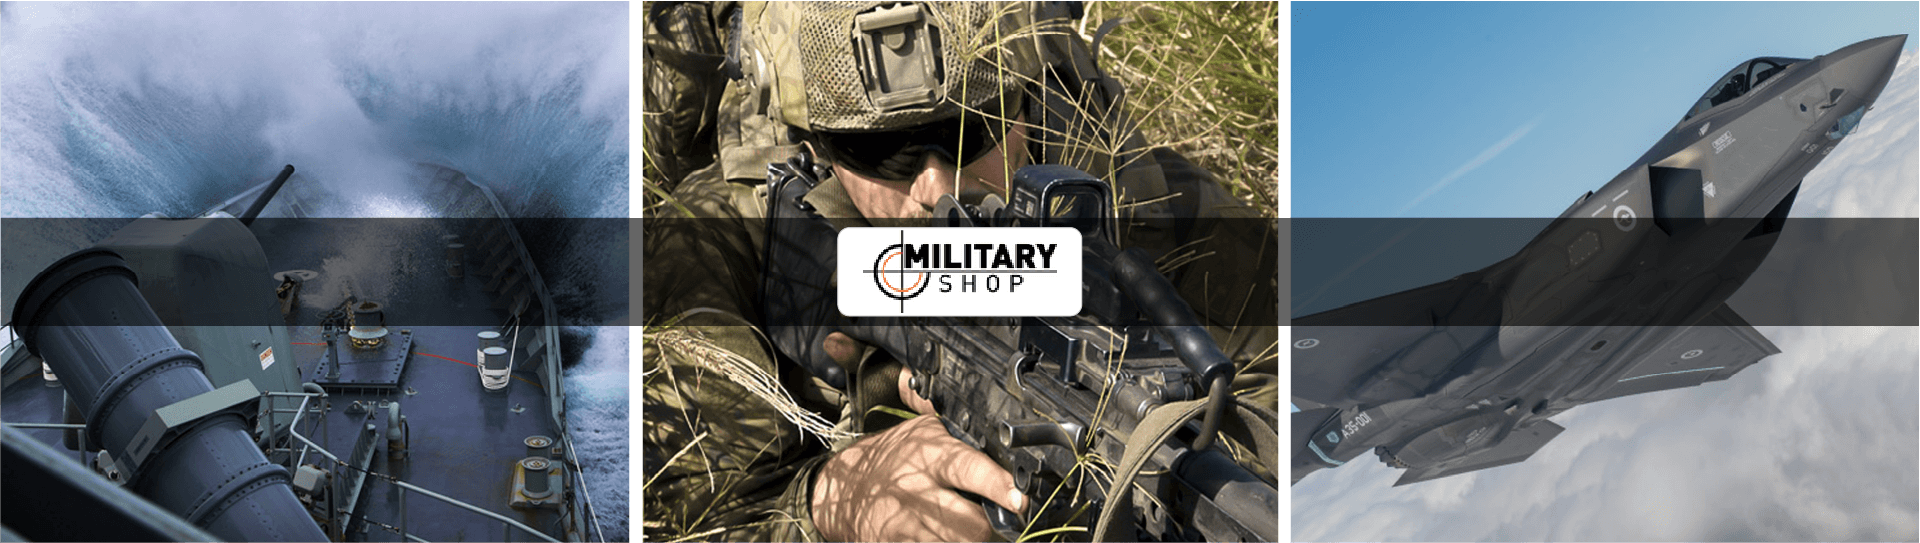 military shop Banner